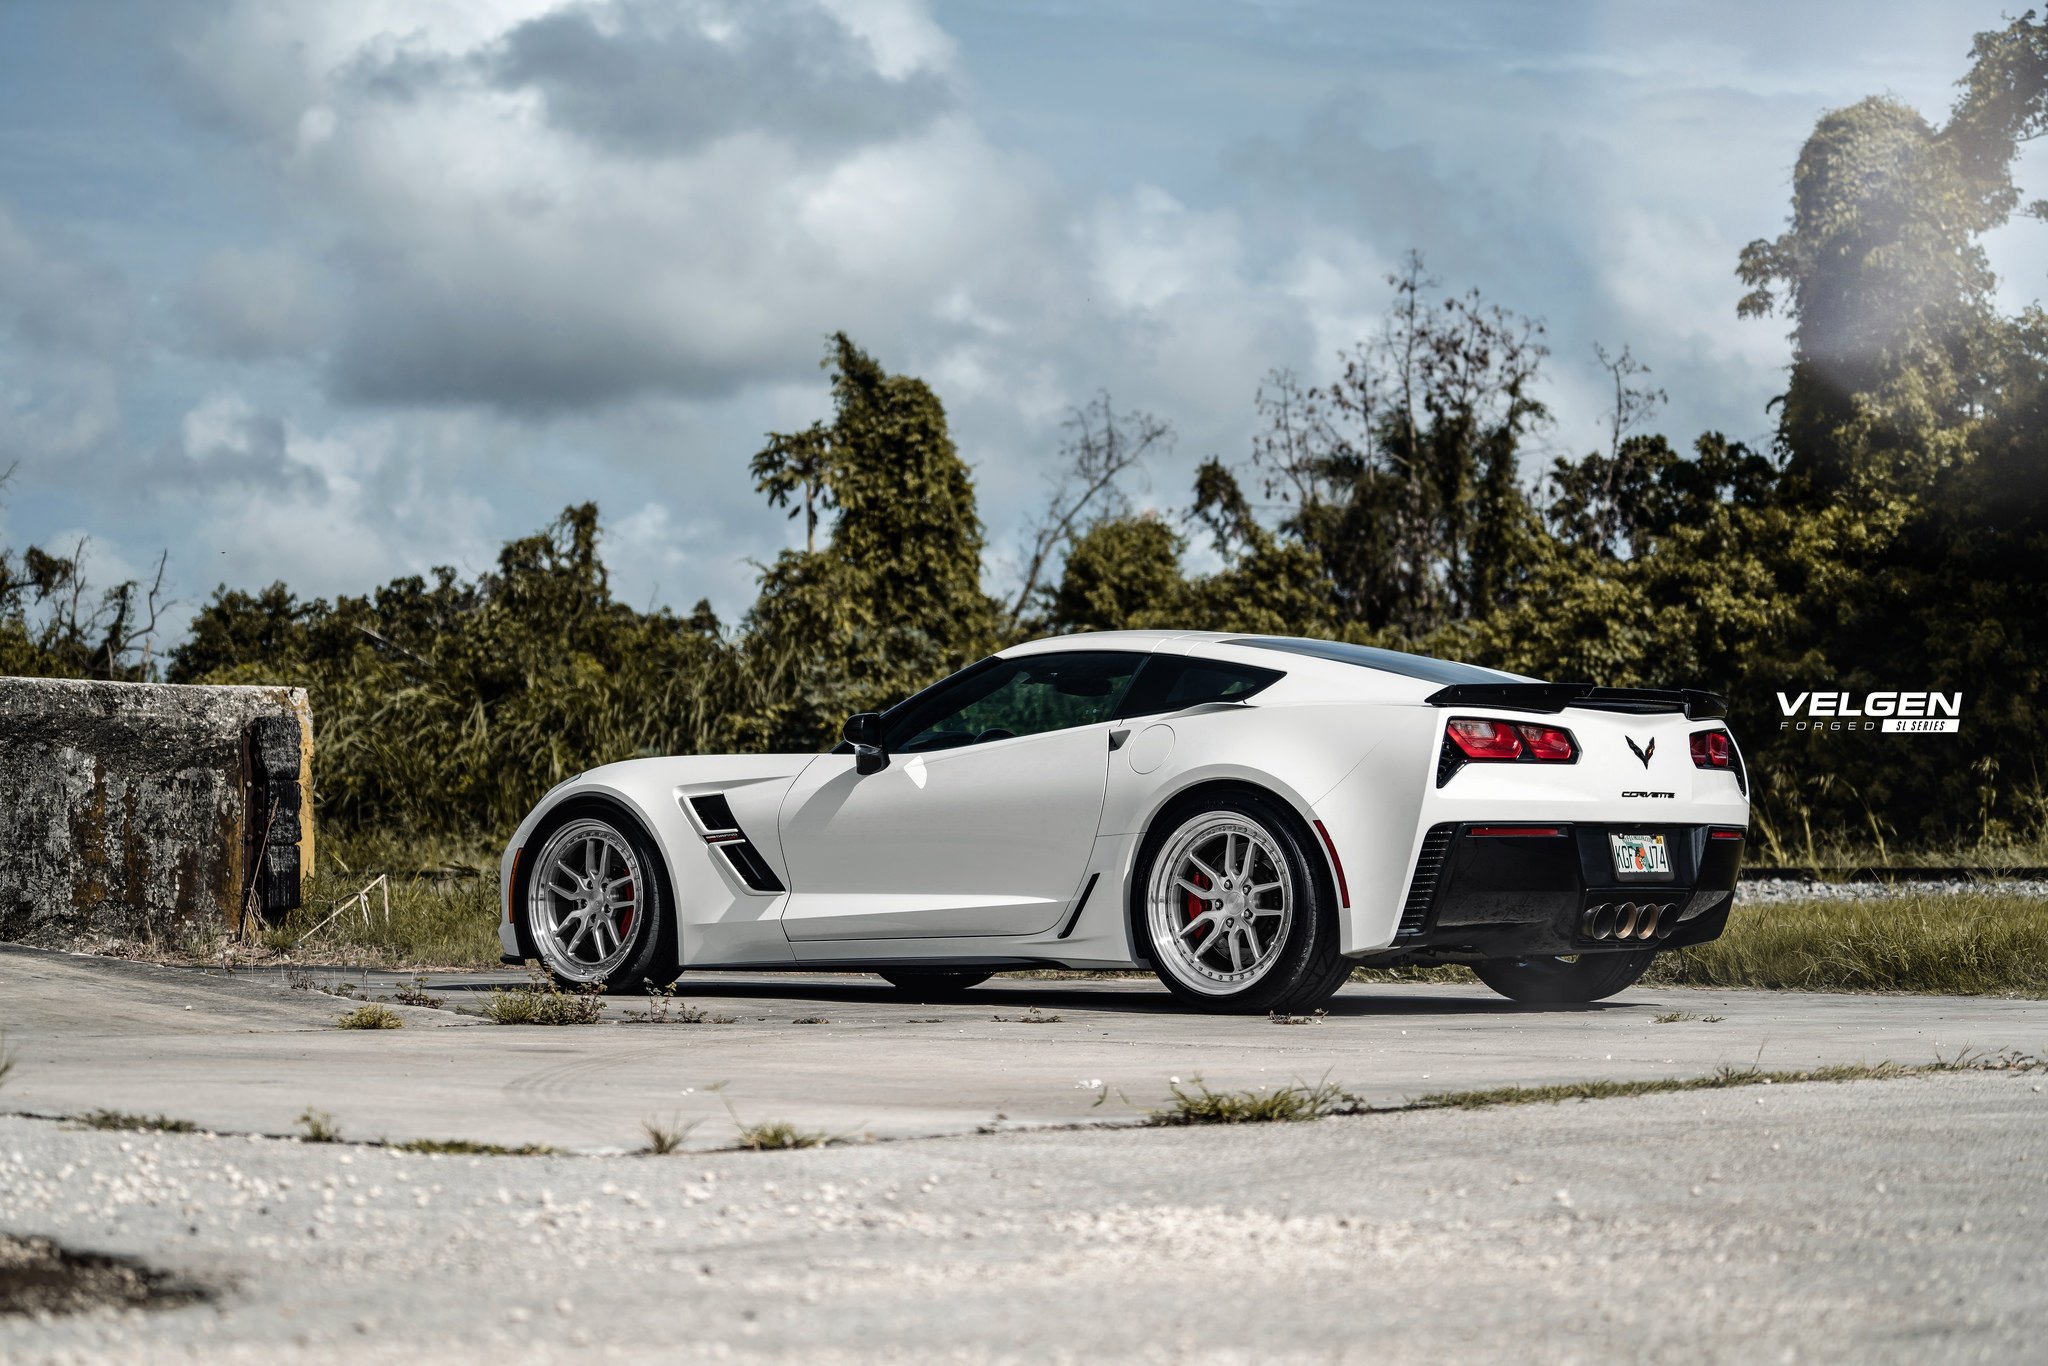 White Chevy Corvette with Aftermarket Side Scoops - Photo by Velgen Wheels